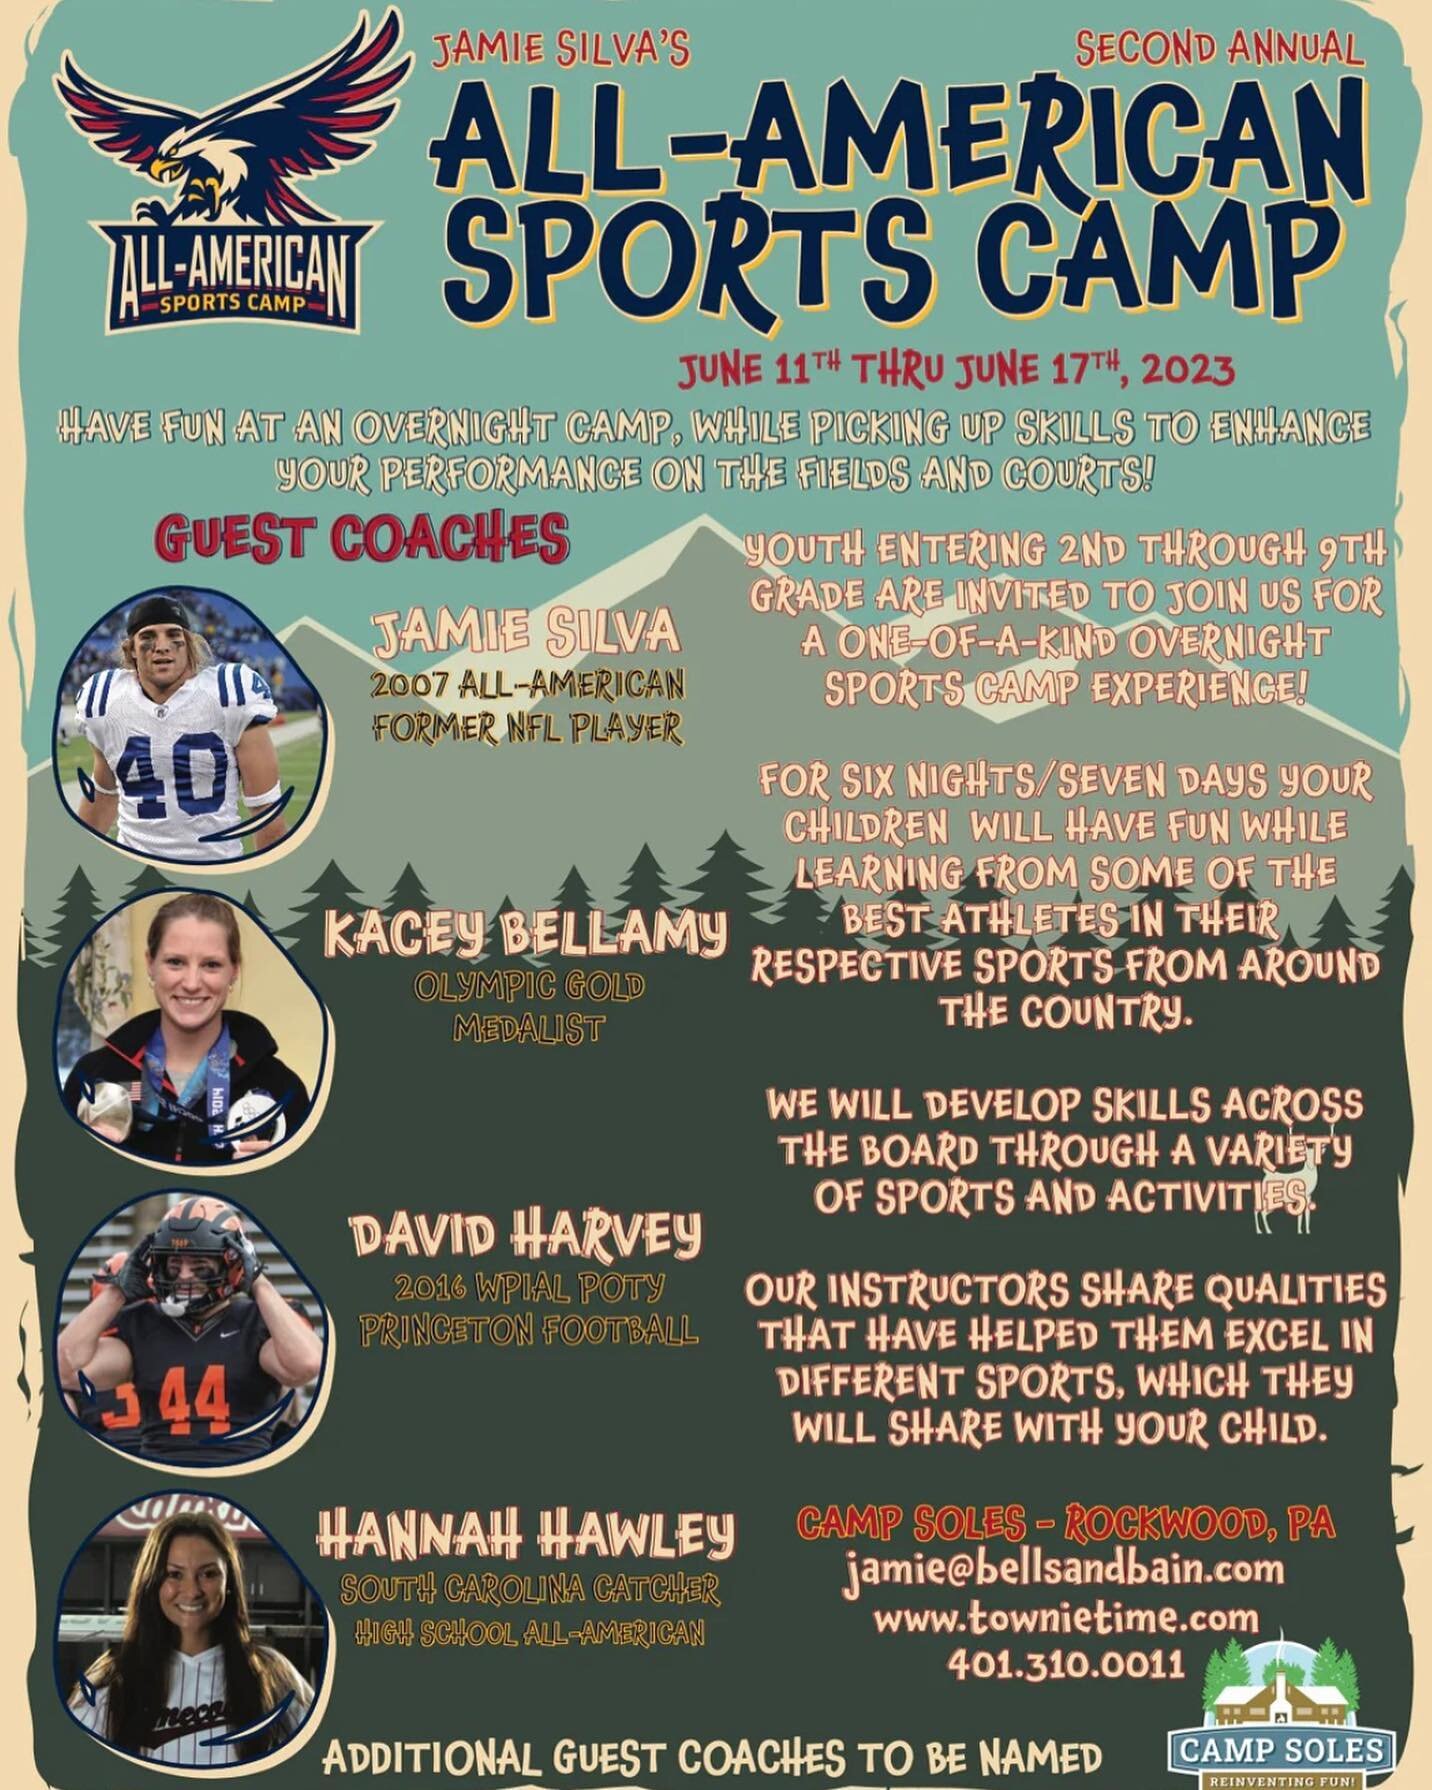 🚨 REGISTRATION CLOSES JUNE 1, 2023 🚨

Jamie Silva&rsquo;s 2nd Annual All-American Sports Camp
(June 11, 2023 - June 17, 2023)

WHO: All students entering grades 3rd through 9th fall of 2023.

WHERE: Camp Soles, Rockwood, PA

WHEN: June 11, 2023 thr